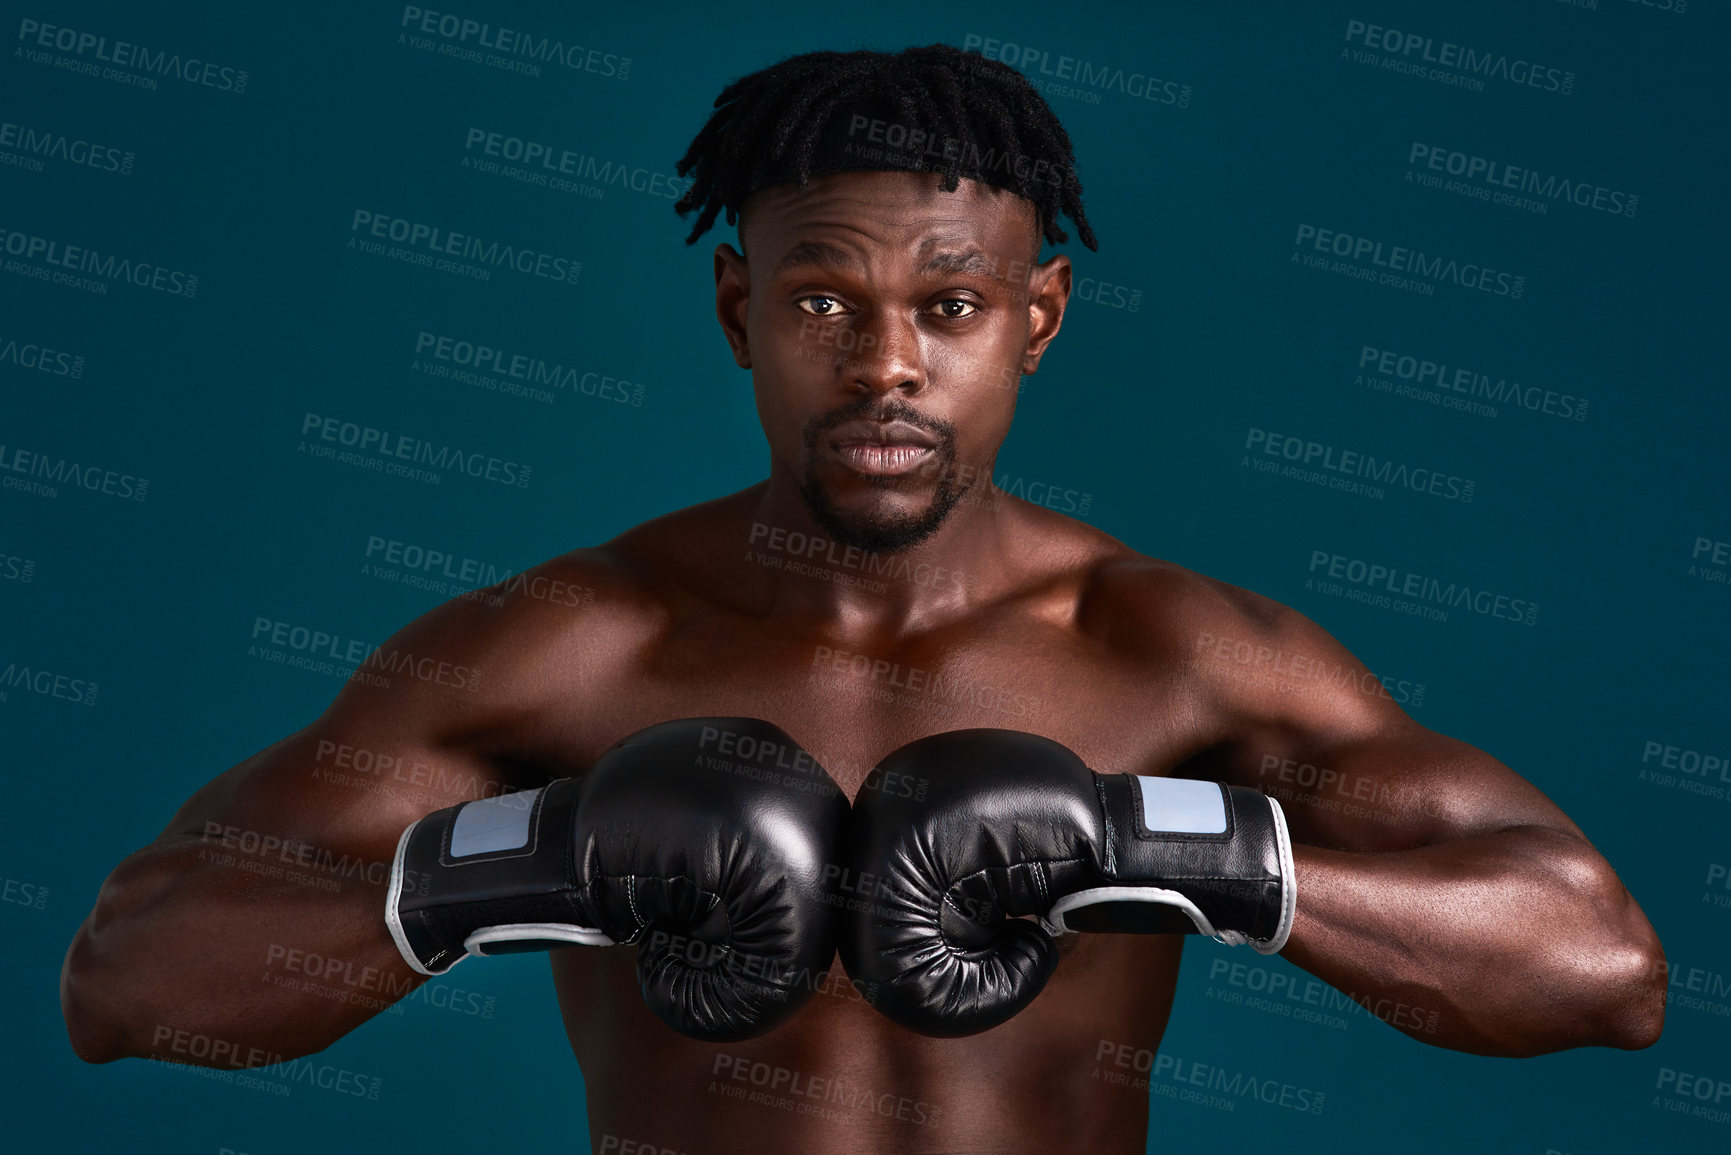 Buy stock photo Cropped portrait of a handsome young boxer working out against a dark background in the studio